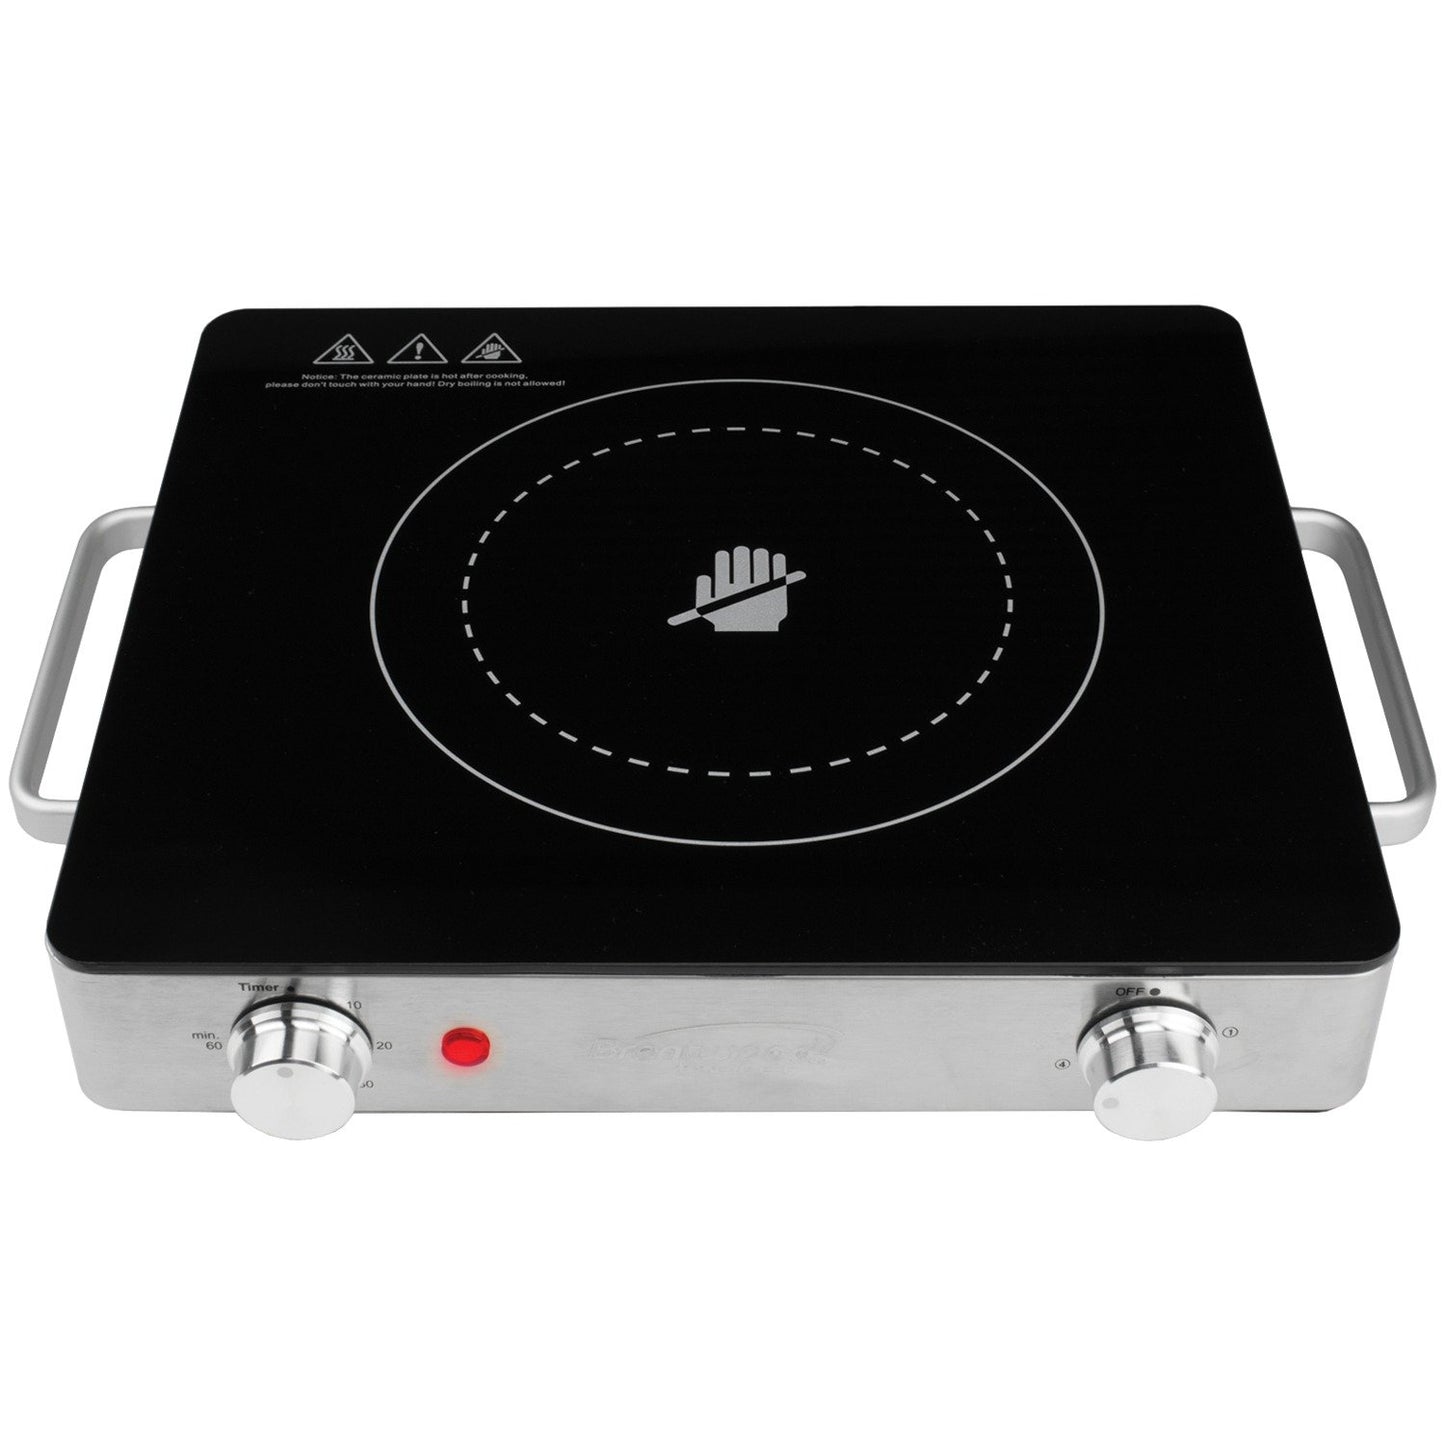 Brentwood Appl. TS-381 1,200W Single Infrared Electric Countertop Burner